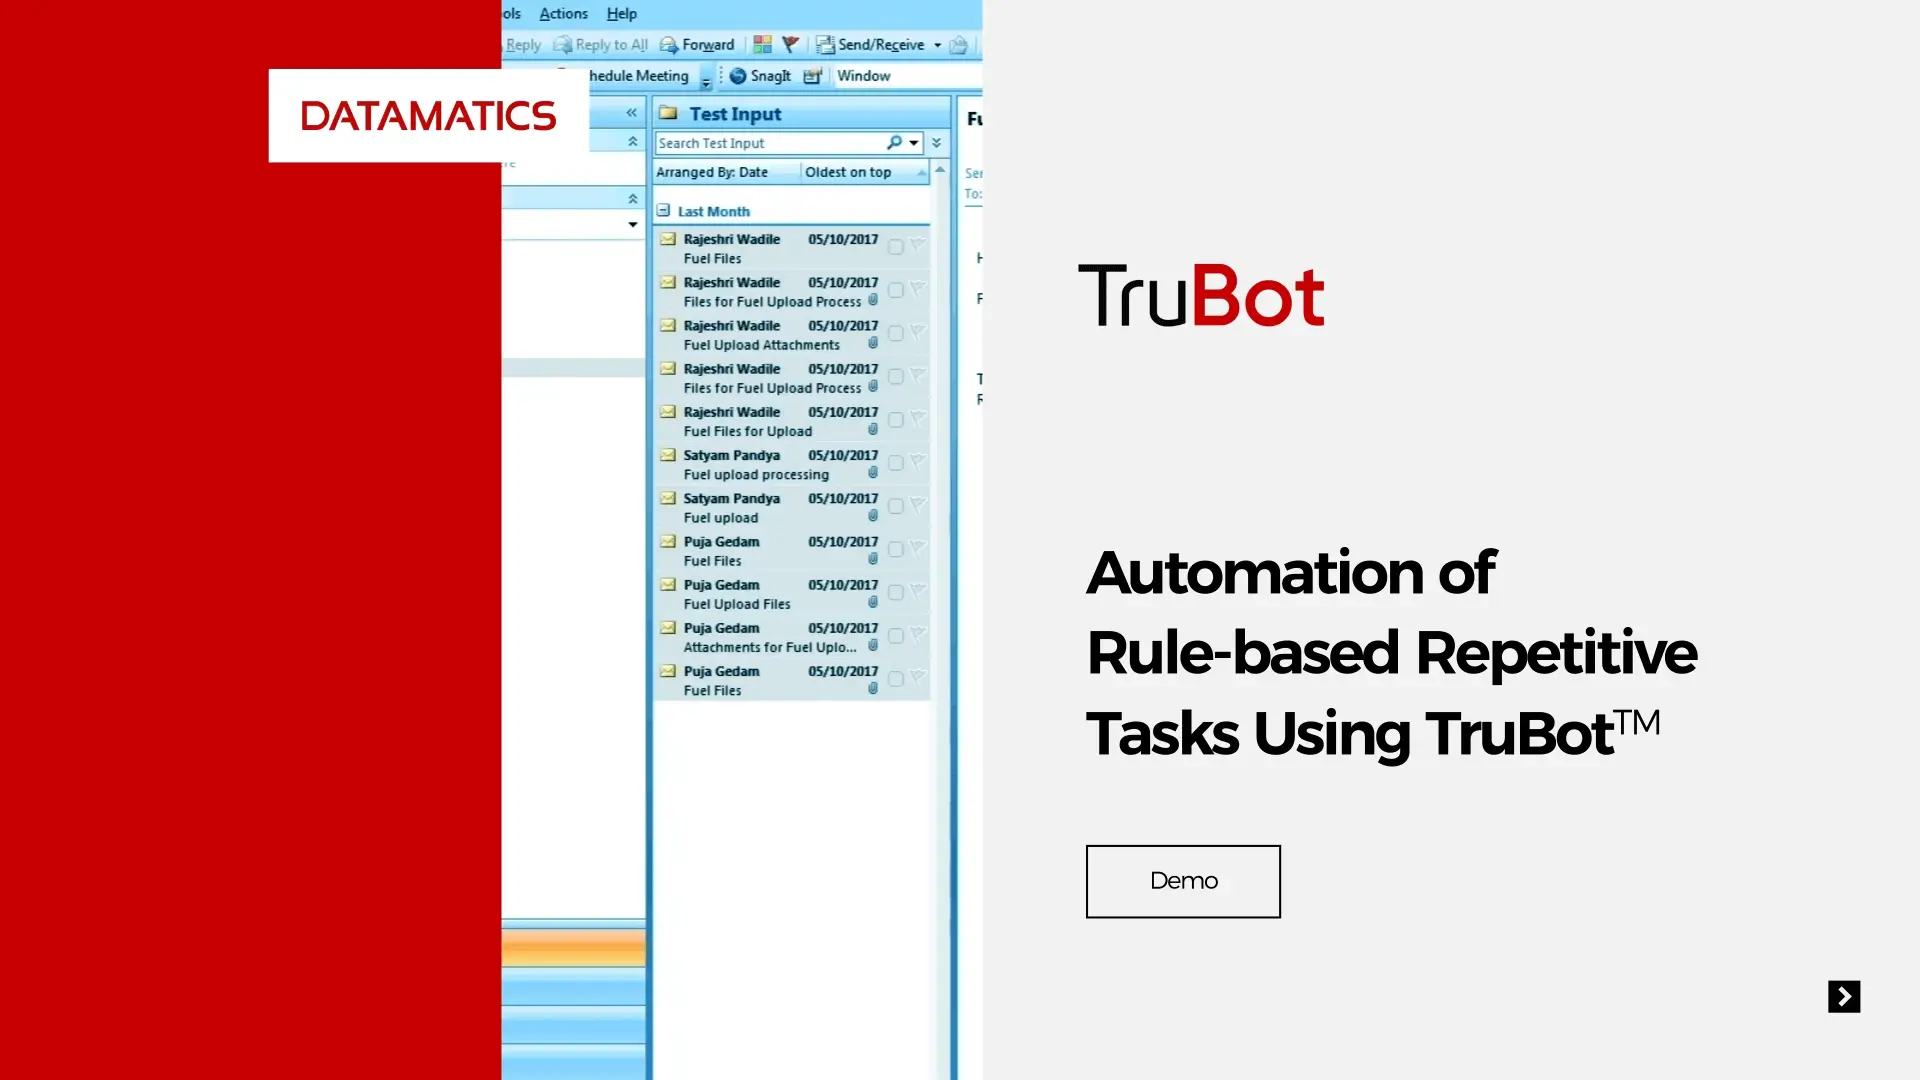 Automation of Rule-based Repetitive Tasks Using TruBot